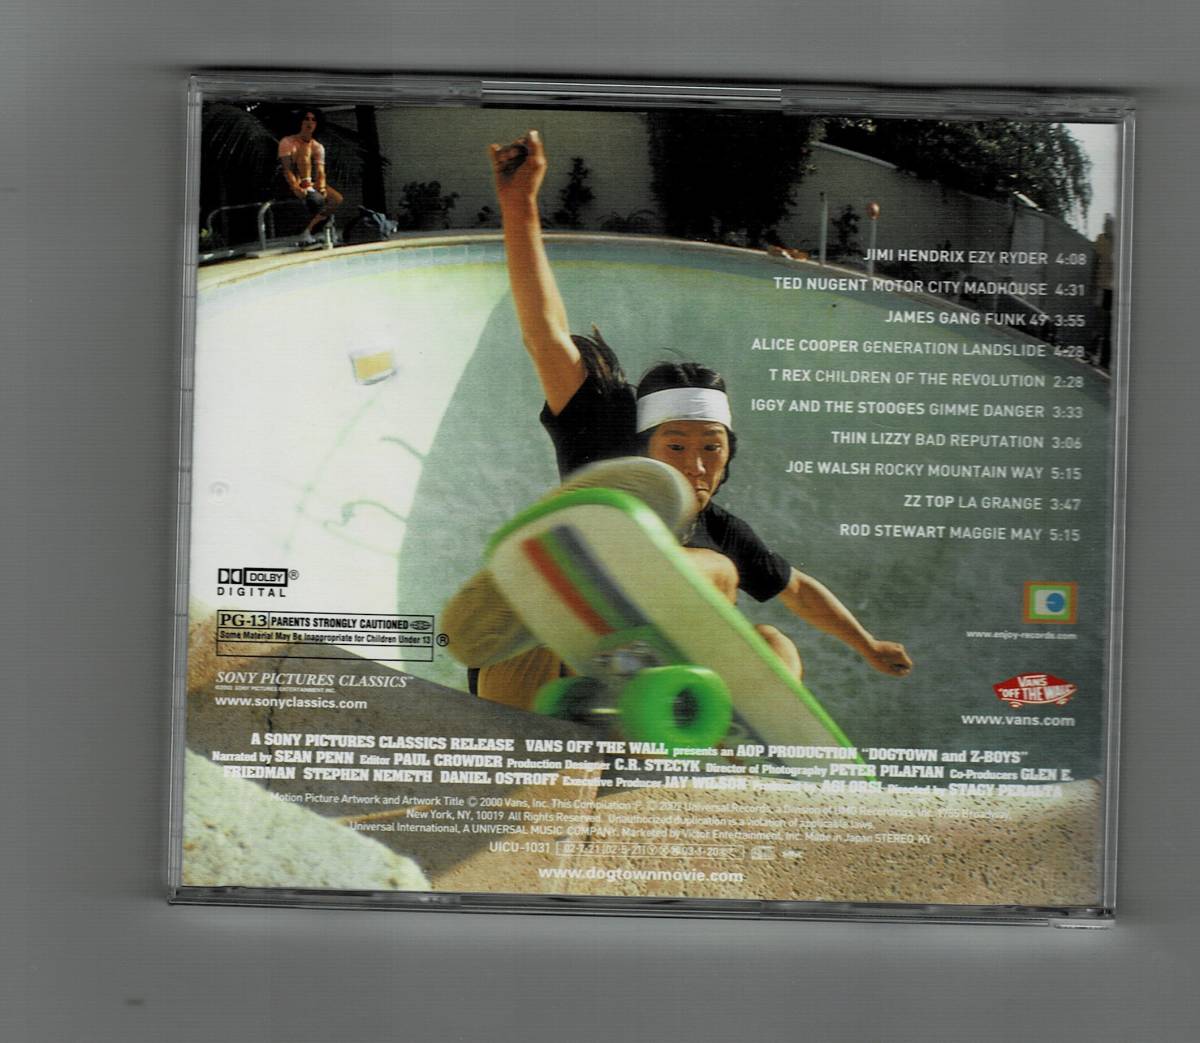  used domestic record CD DOGTOWN AND Z-BOYS soundtrack dog Town soundtrack 